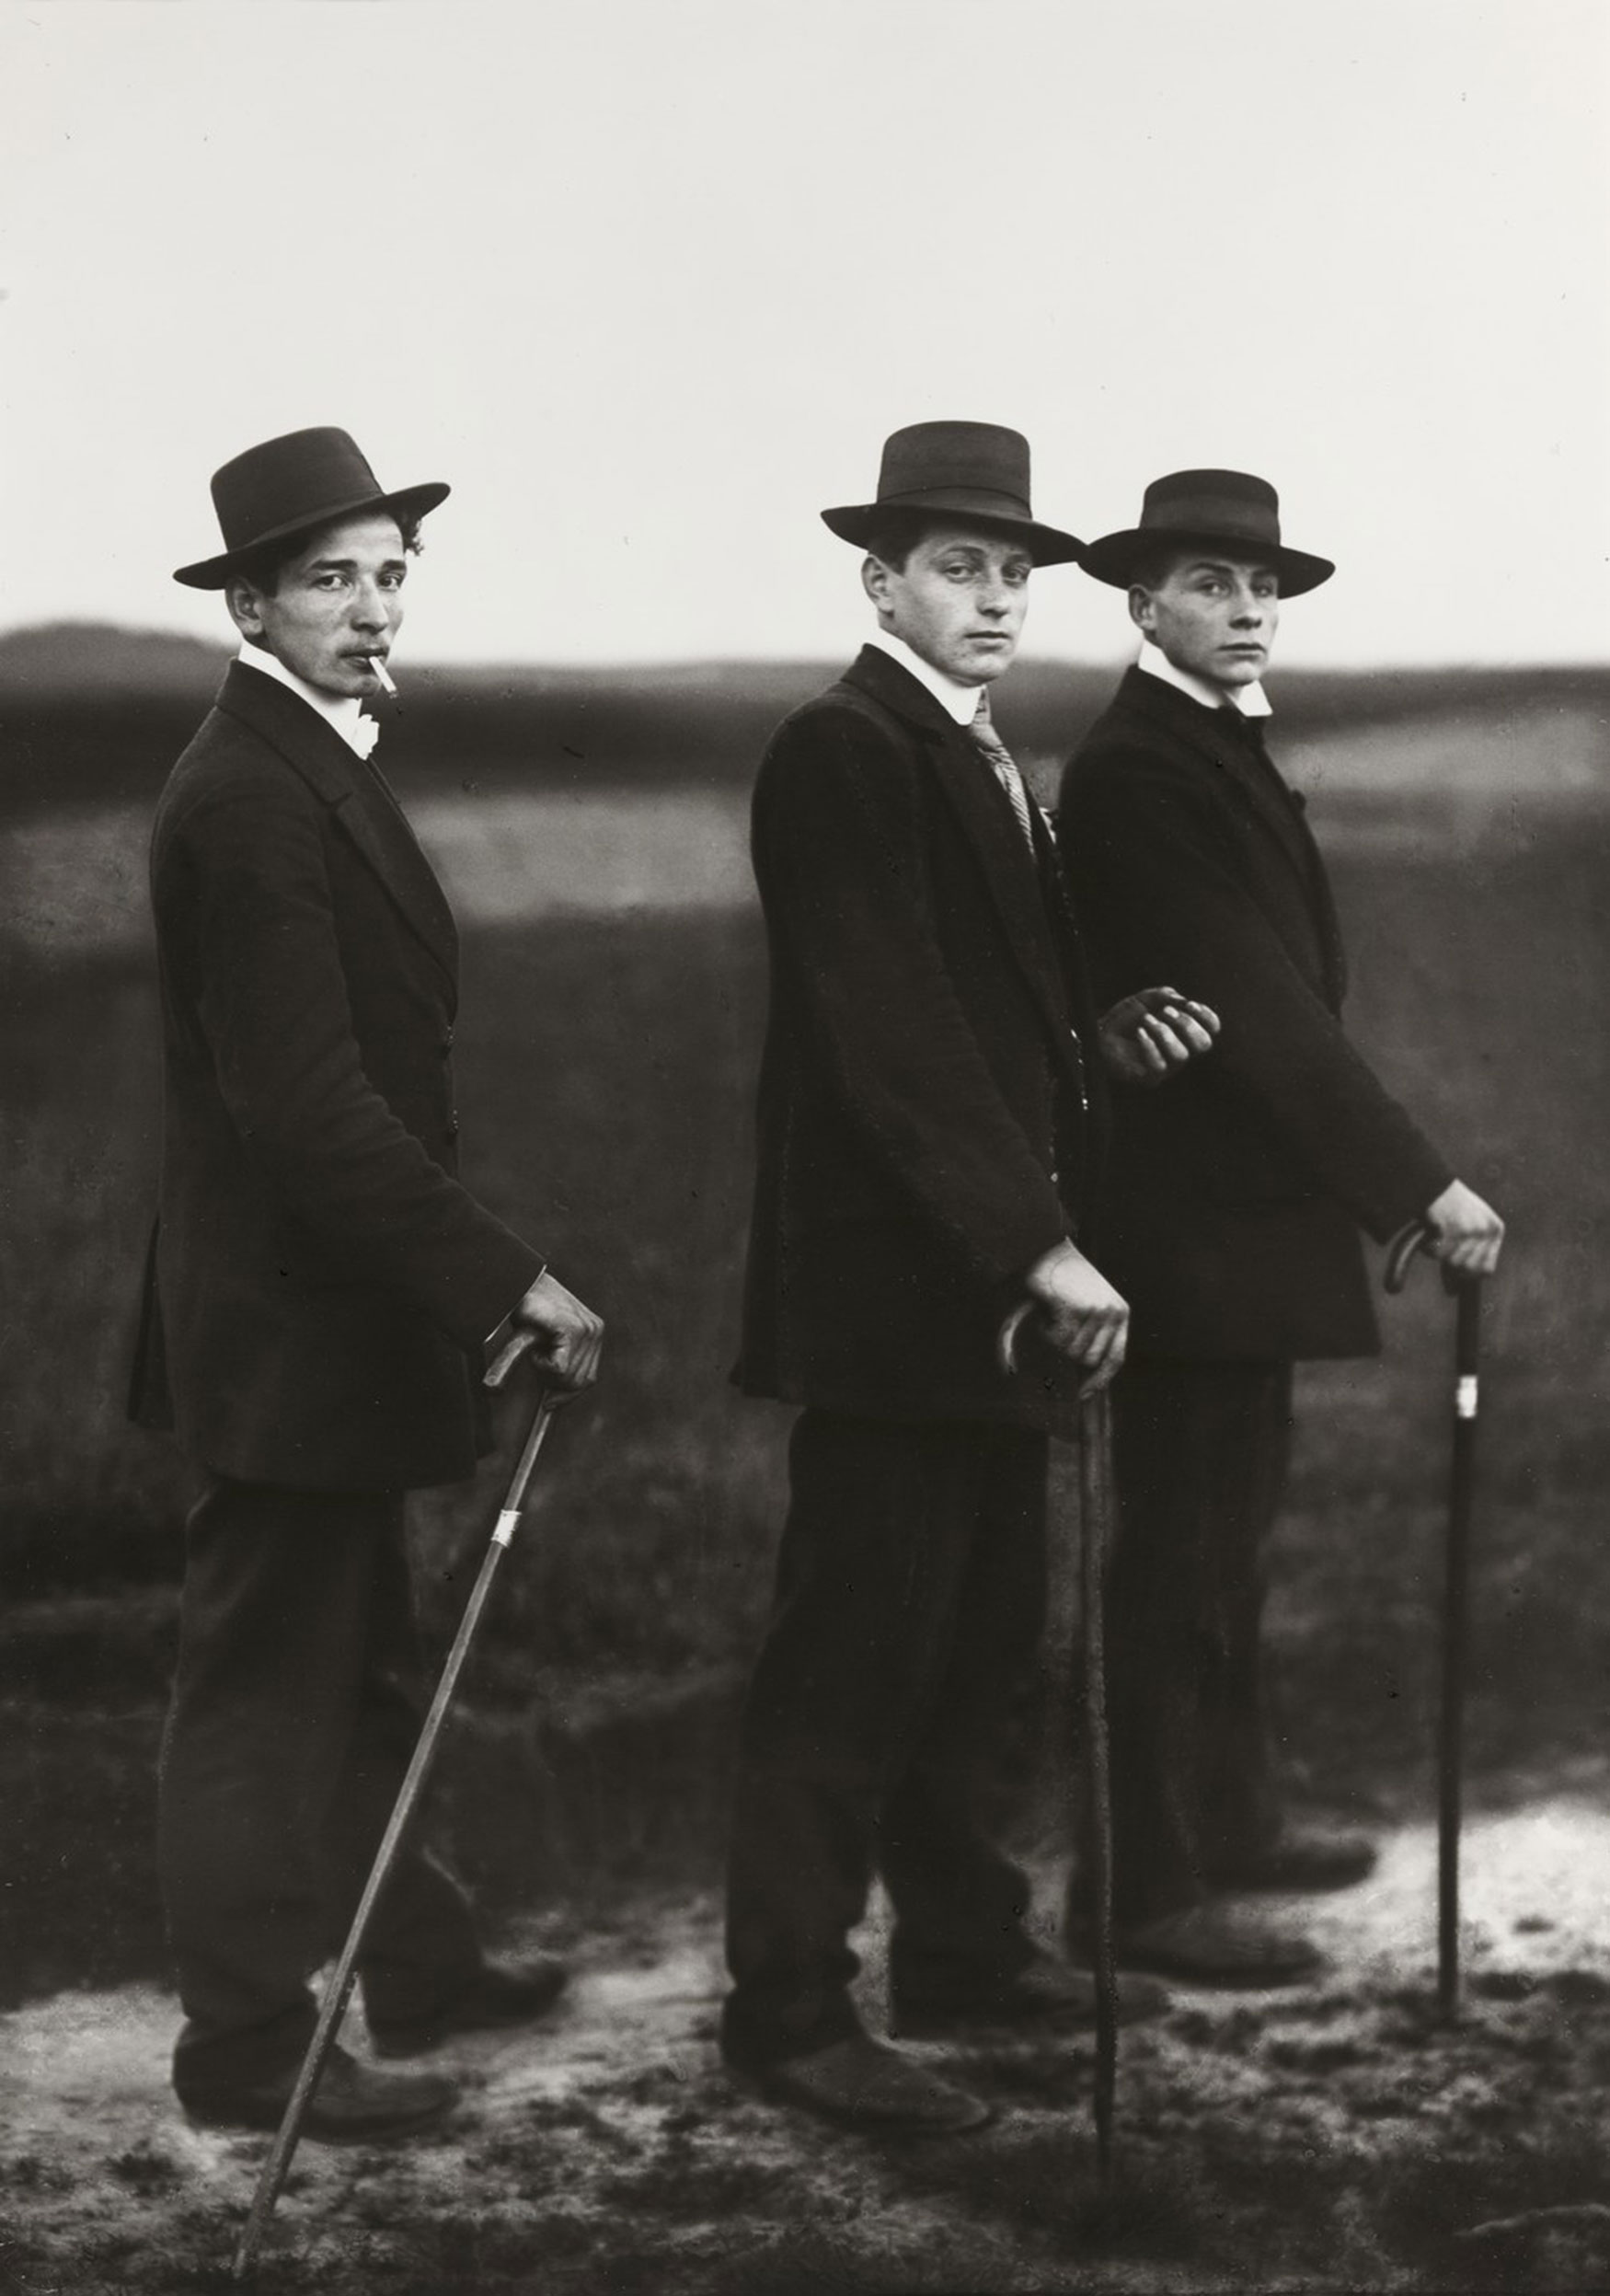 August sander_the suit and the photograph